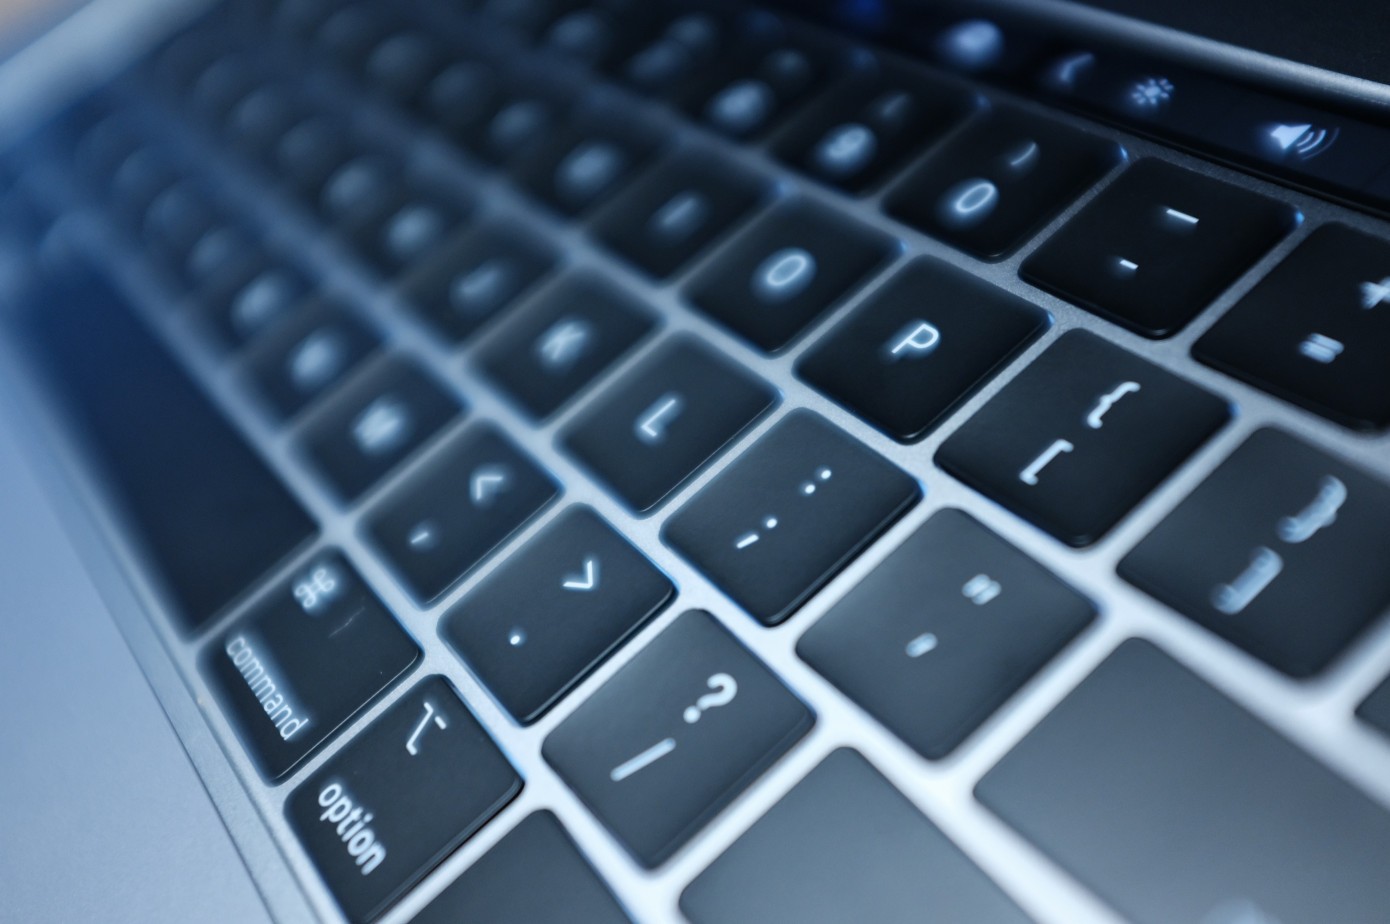 Apple must pay $50 million to compensate users of MacBooks with defective keyboards
